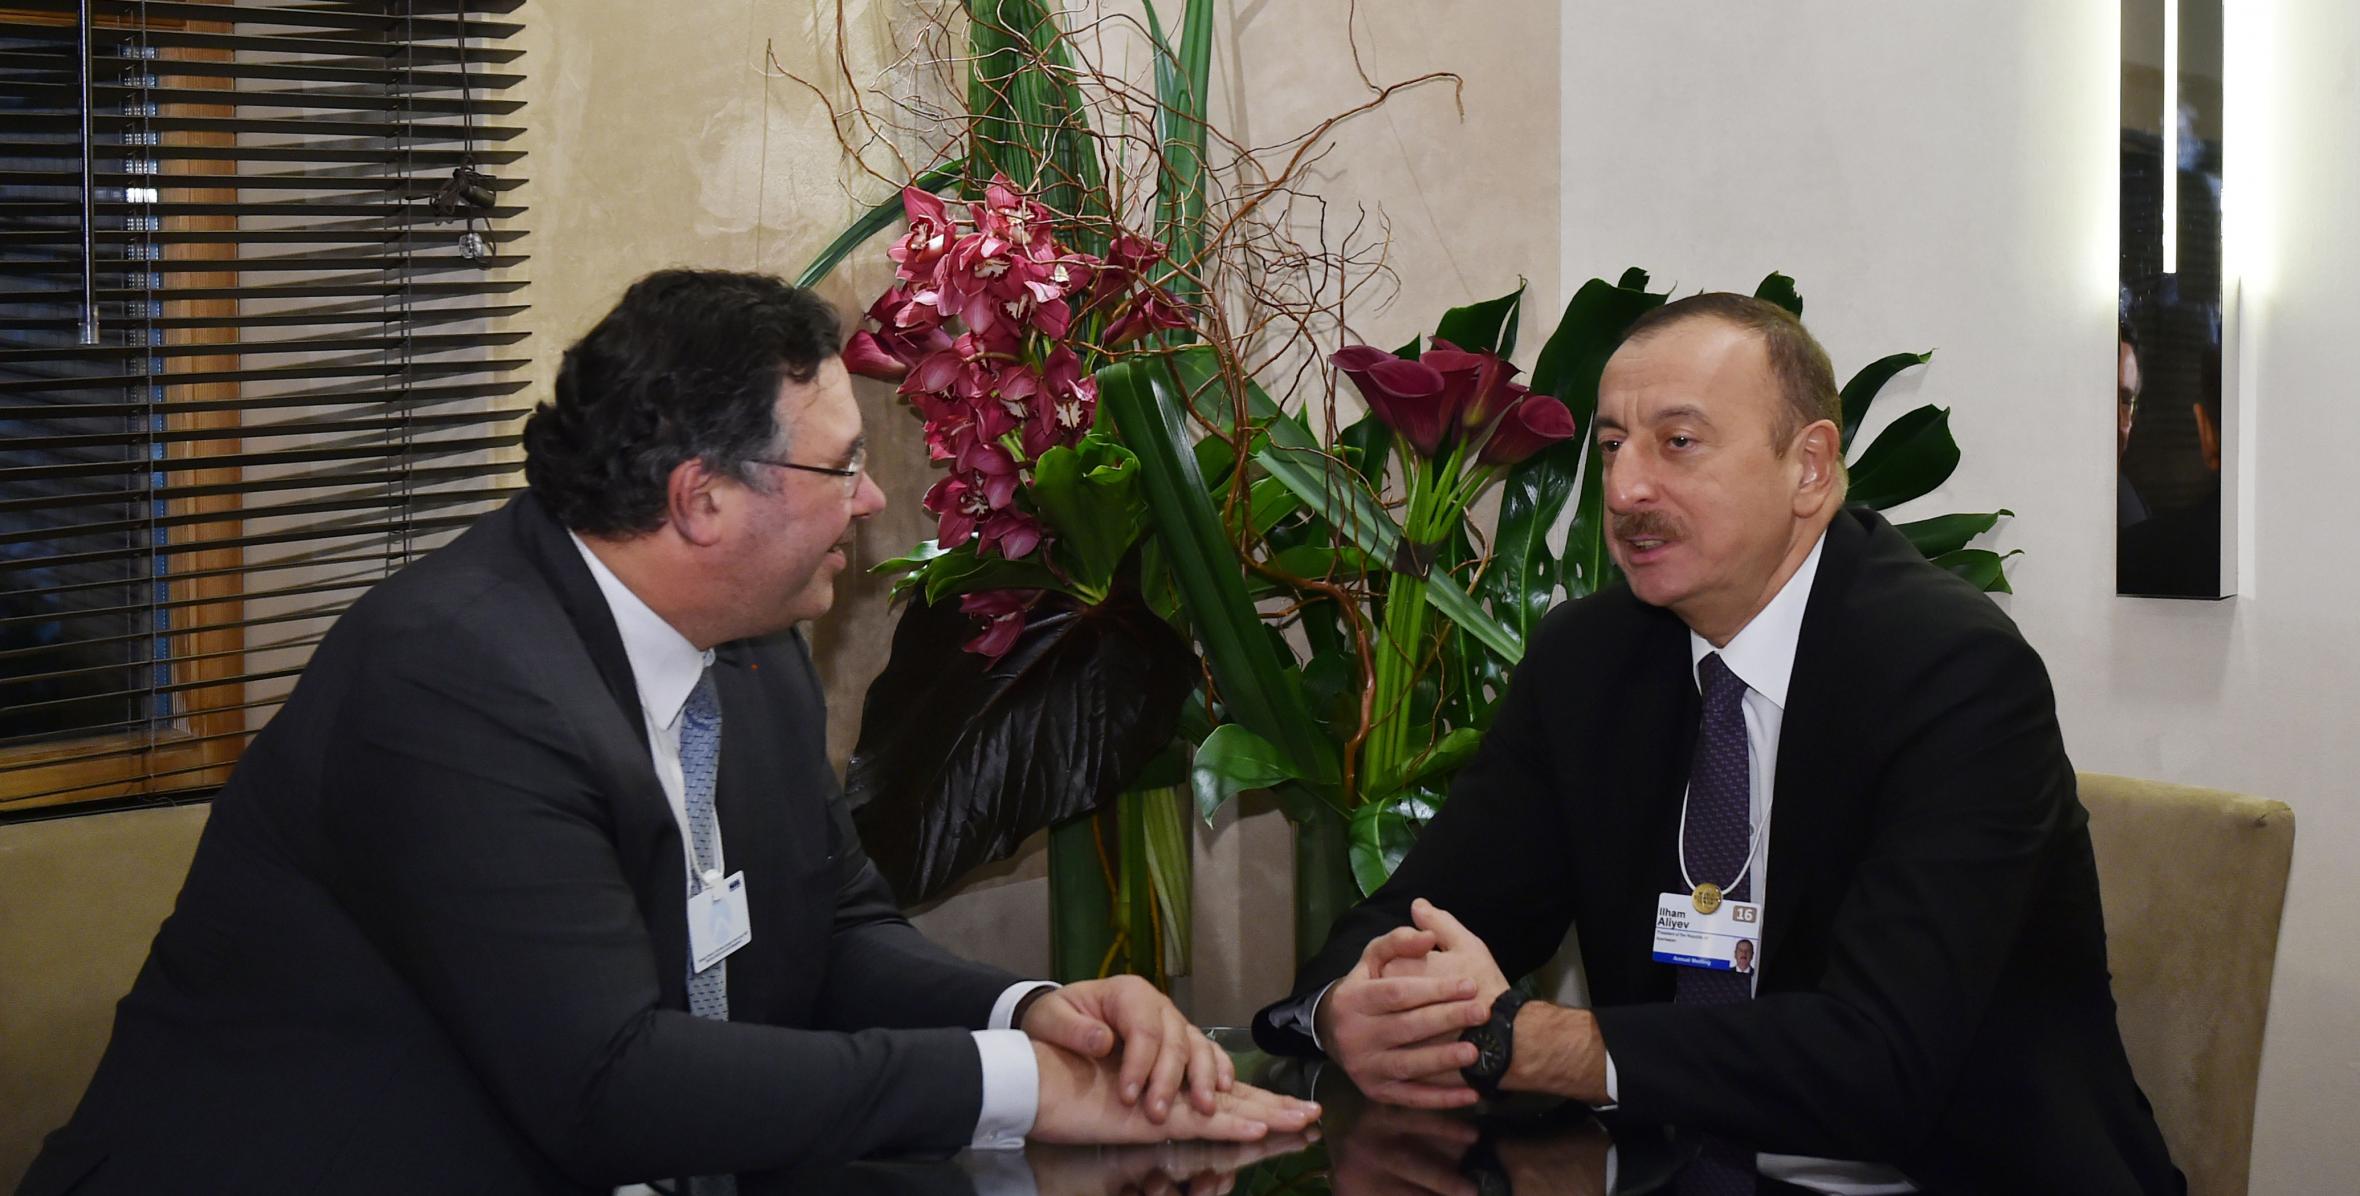 Ilham Aliyev met with Chief Executive Officer of Total in Davos